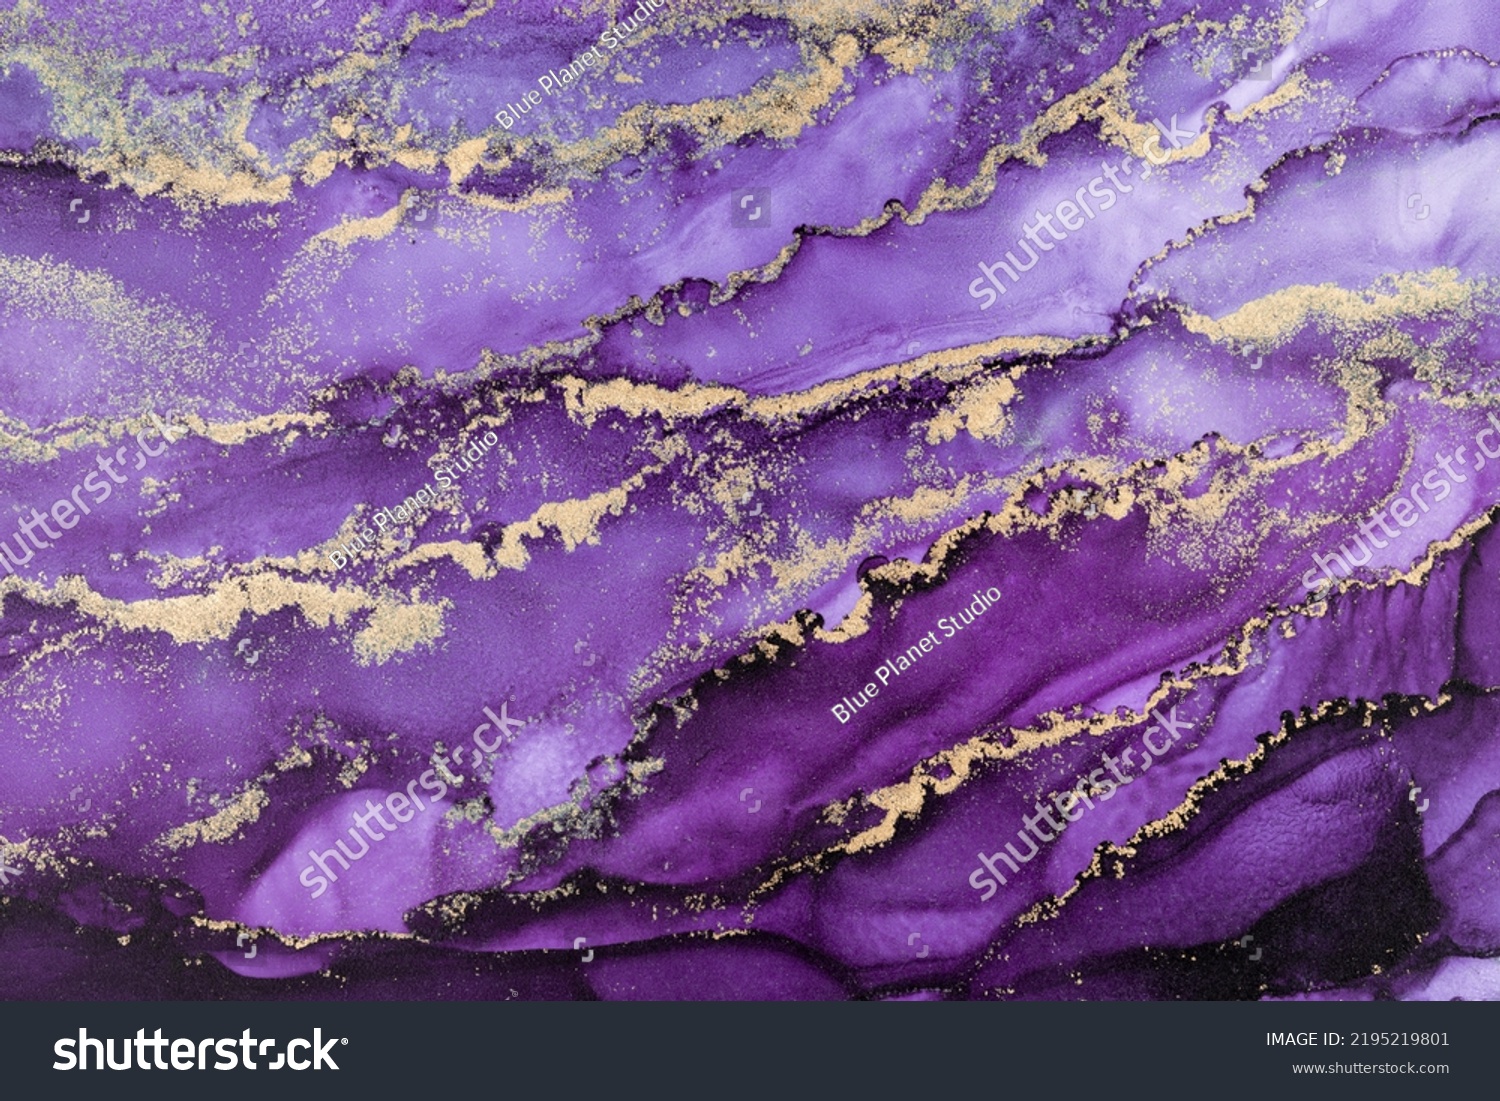 Stock Photo Marble Ink Abstract Art From Meticulous Original Painting Abstract Background Painting Was 2195219801 